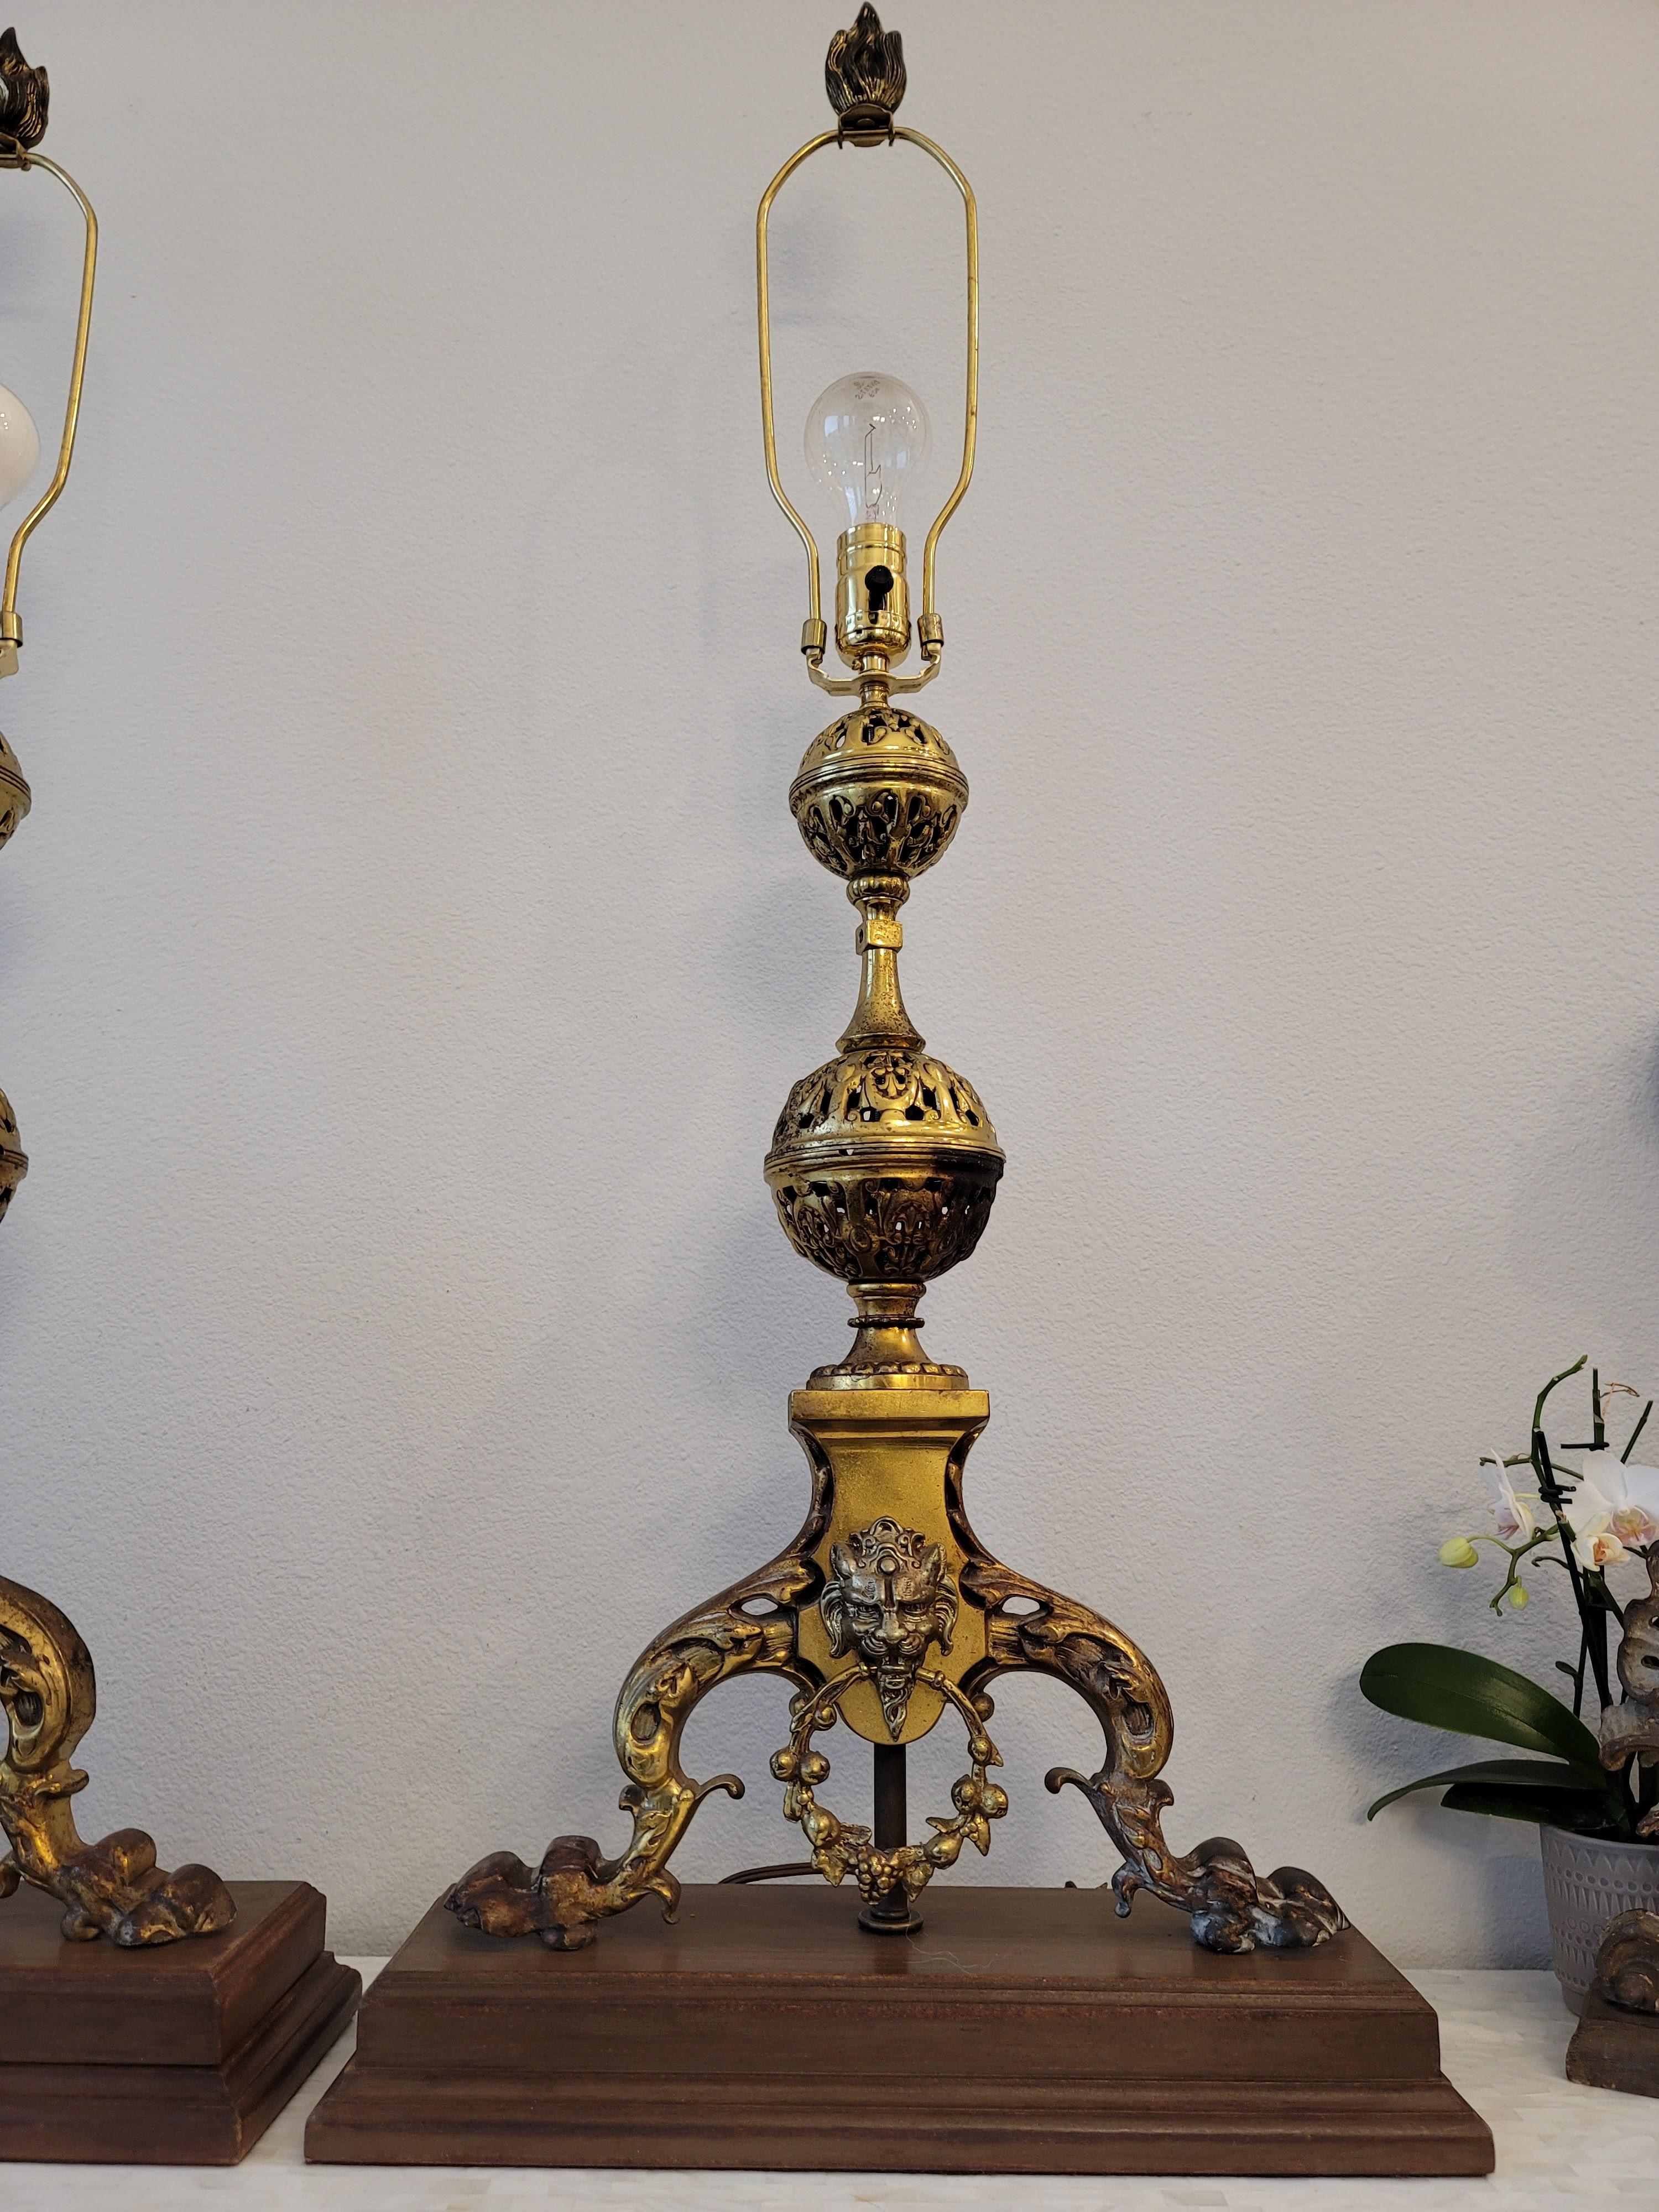 19th Century French Gothic Revival Andirons Mounted As Table Lamps - A Pair  For Sale 7